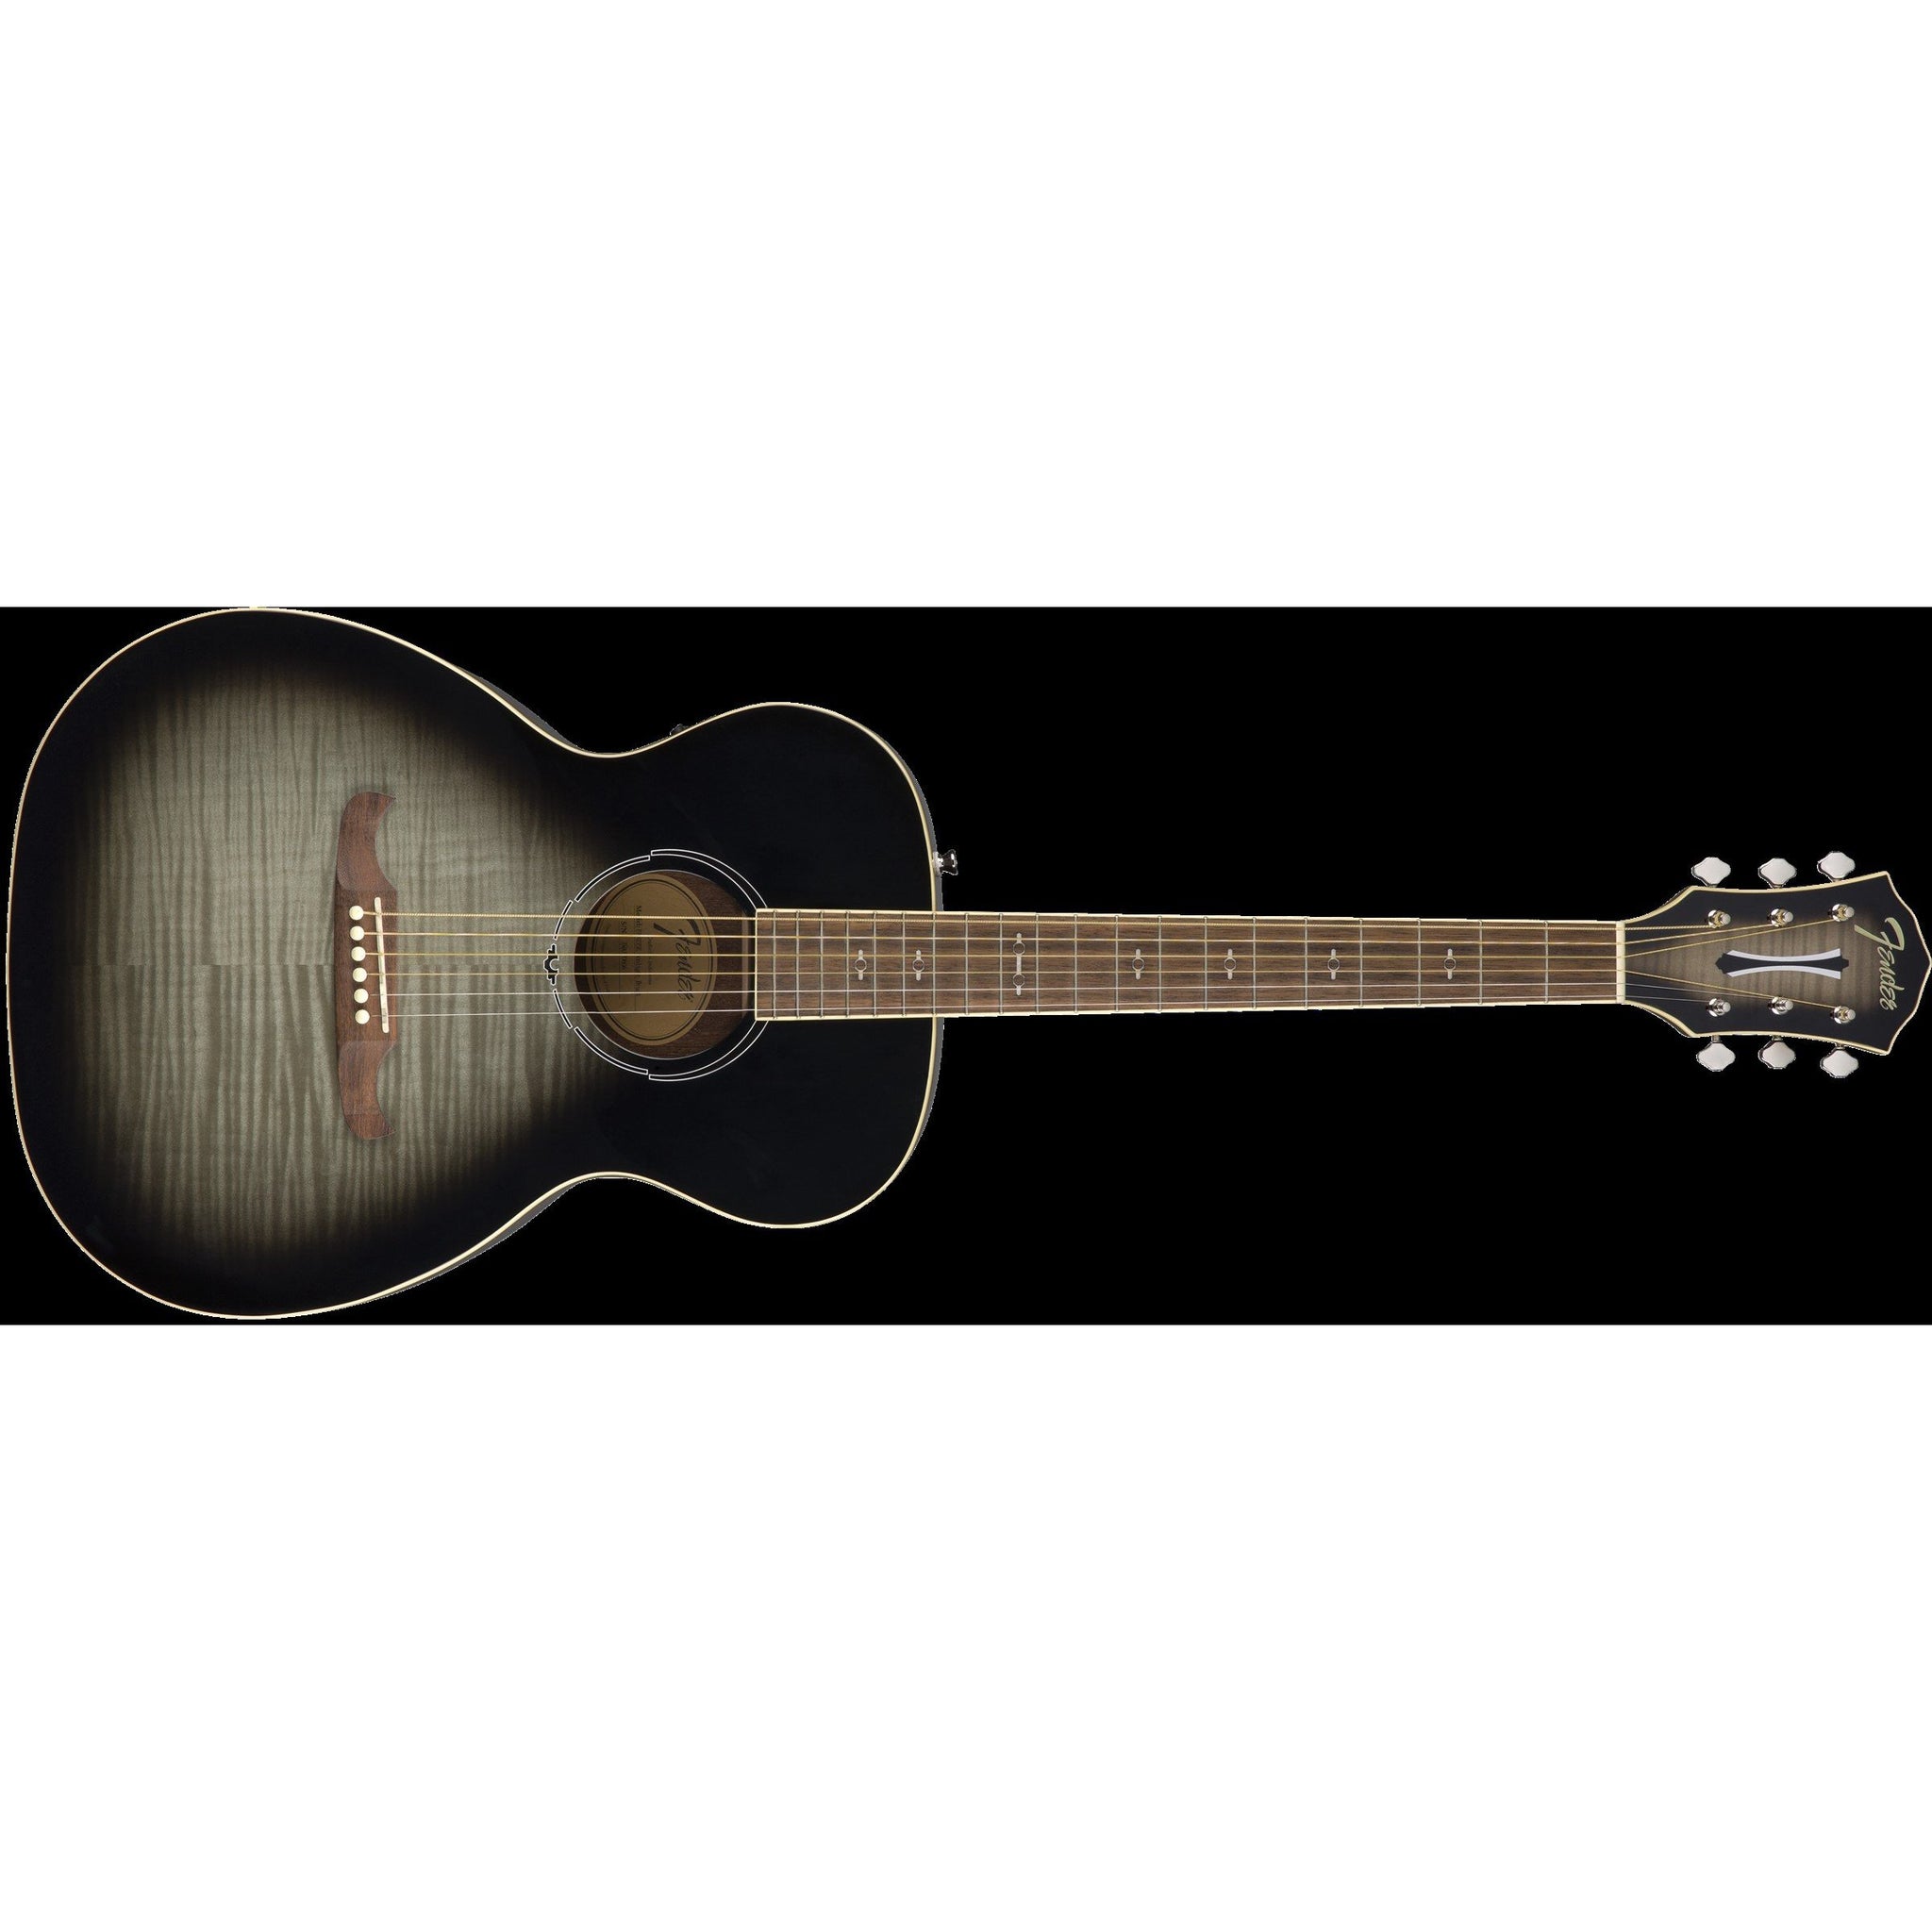 Fender FA-235E Concert Acoustic/Electric Guitar RW Moonlight Burst (Discontinued)-Music World Academy